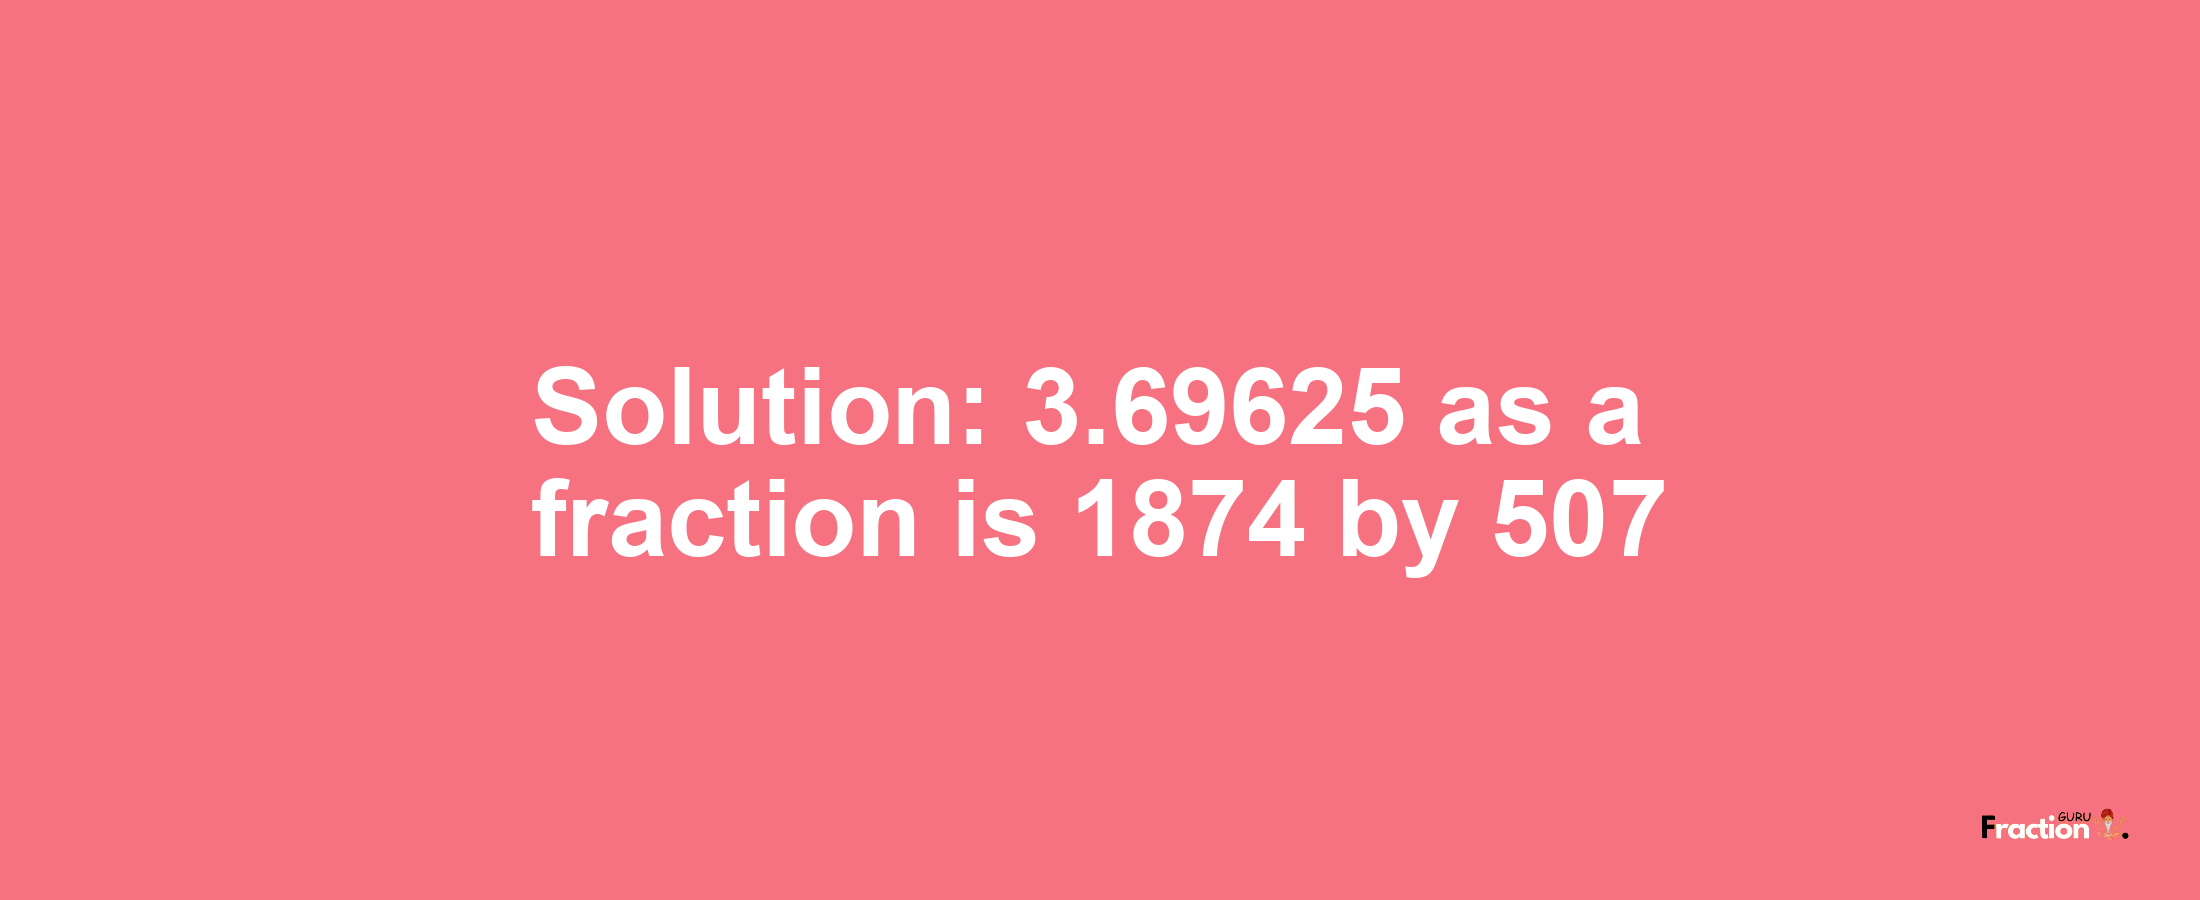 Solution:3.69625 as a fraction is 1874/507